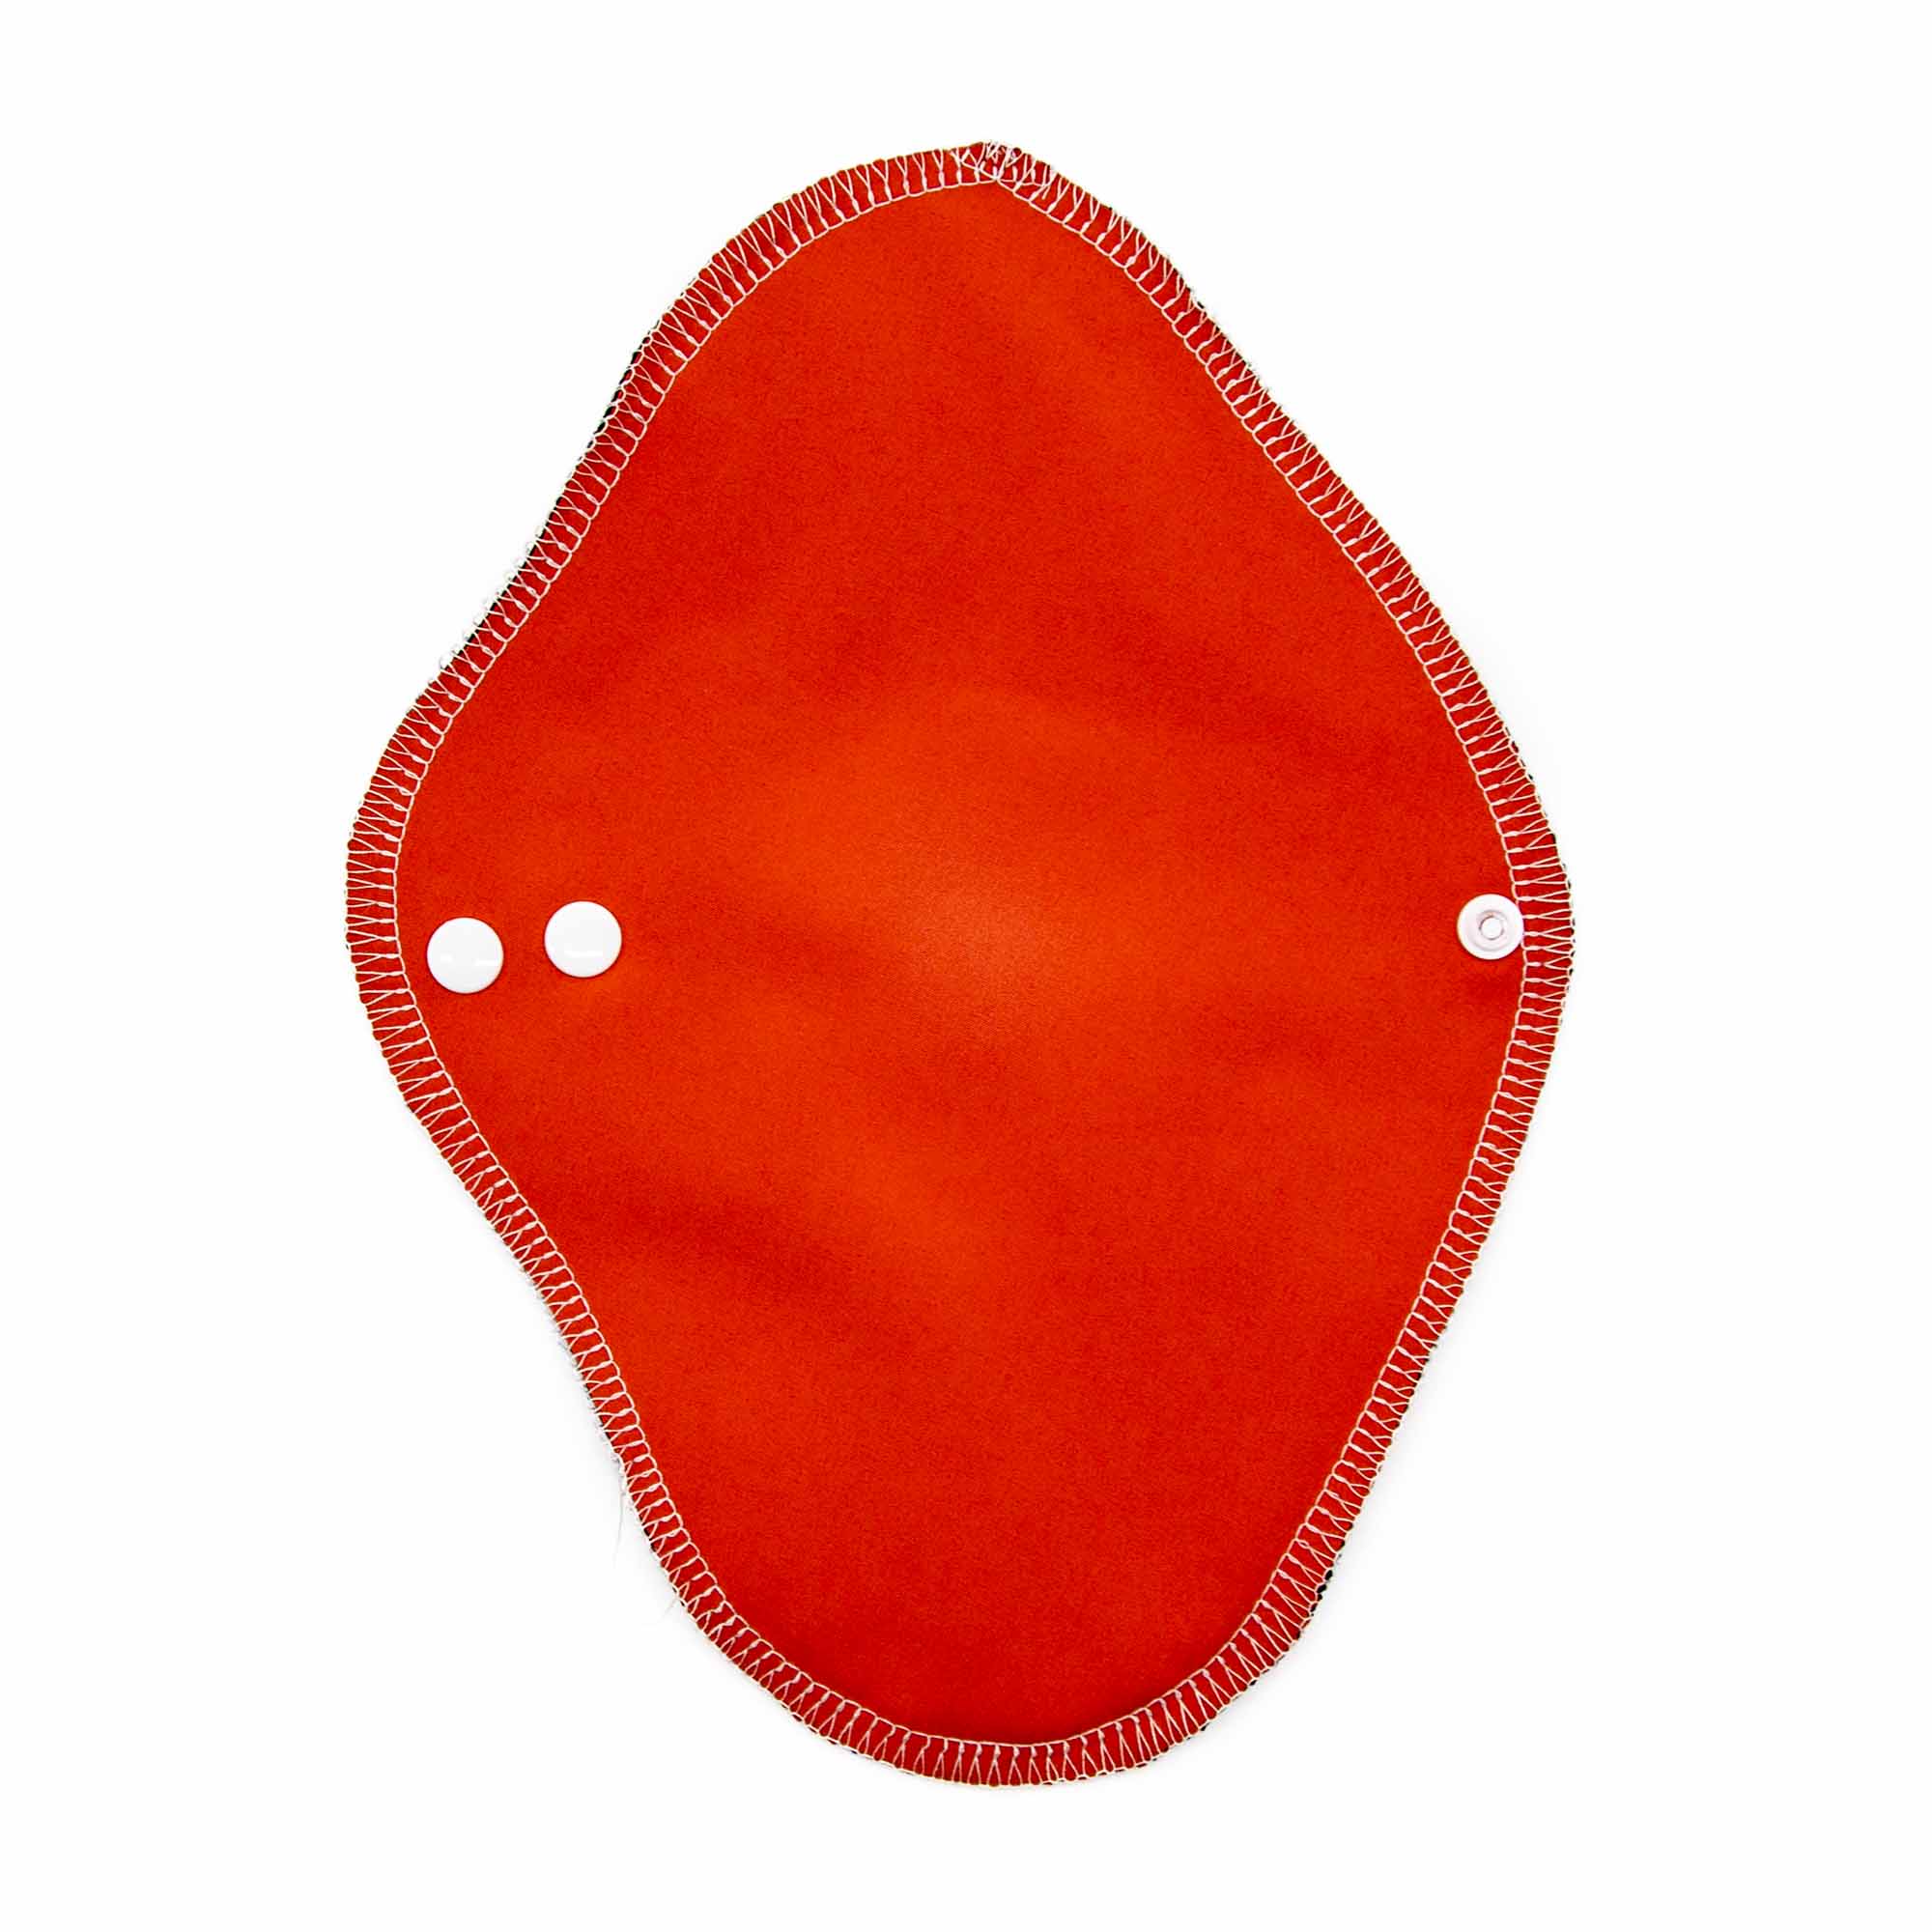 Skoochie Coo Cloth Pad - Light - Mortise And Tenon